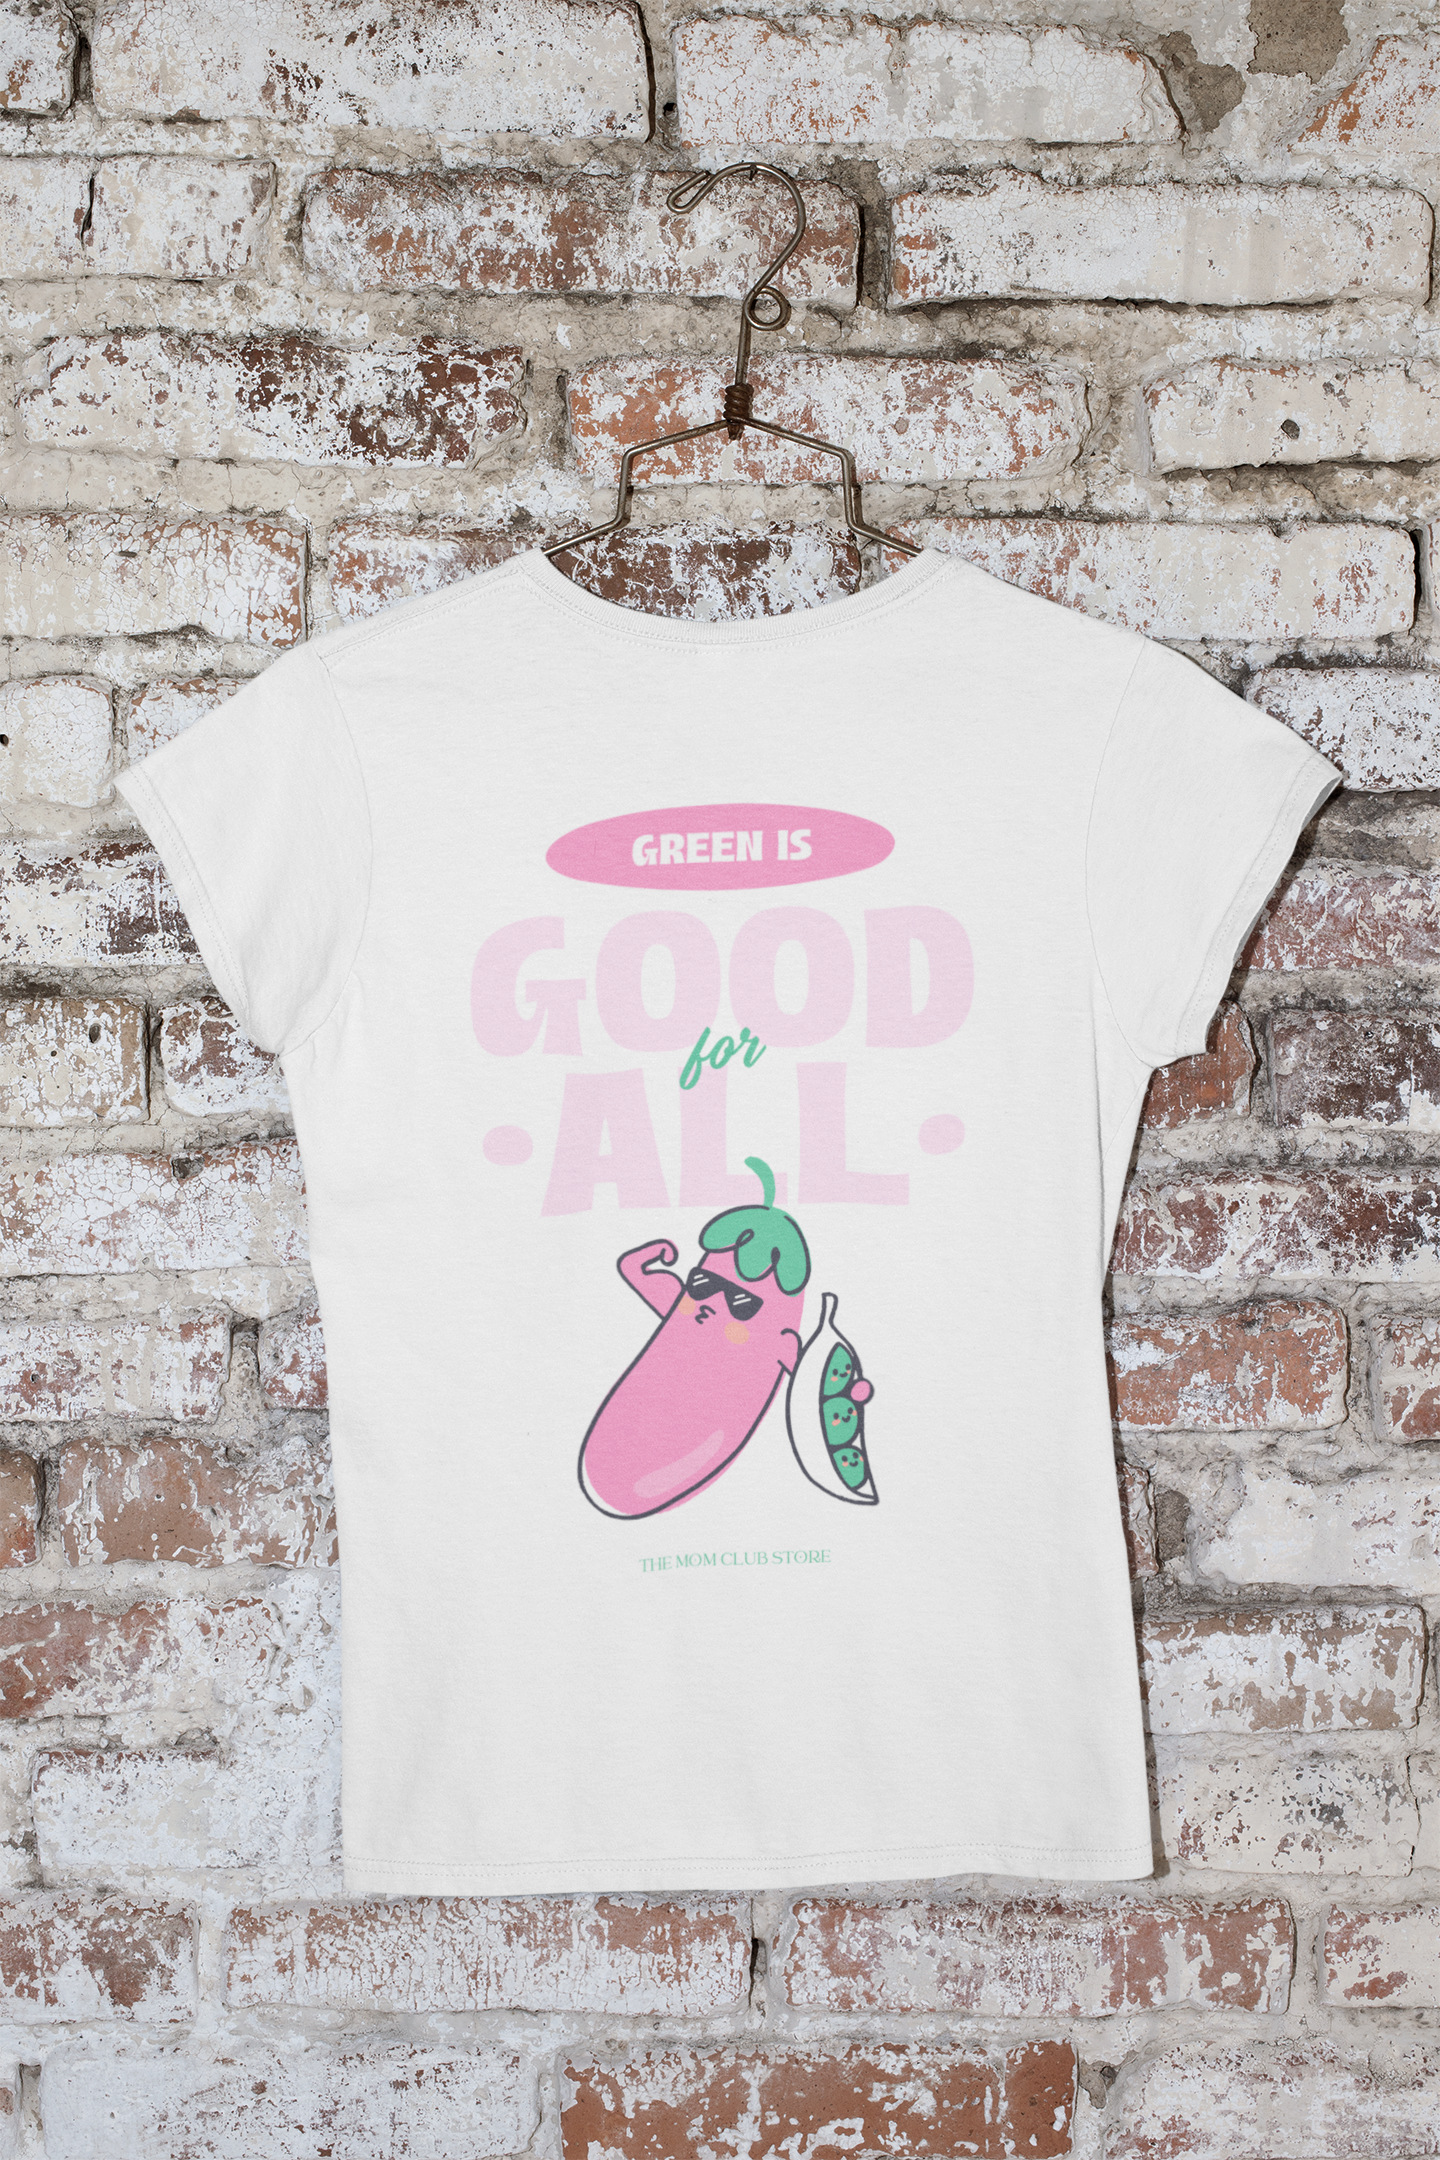 GREEN IS GOOD for all unisex print short-sleeve t-shirt for adults